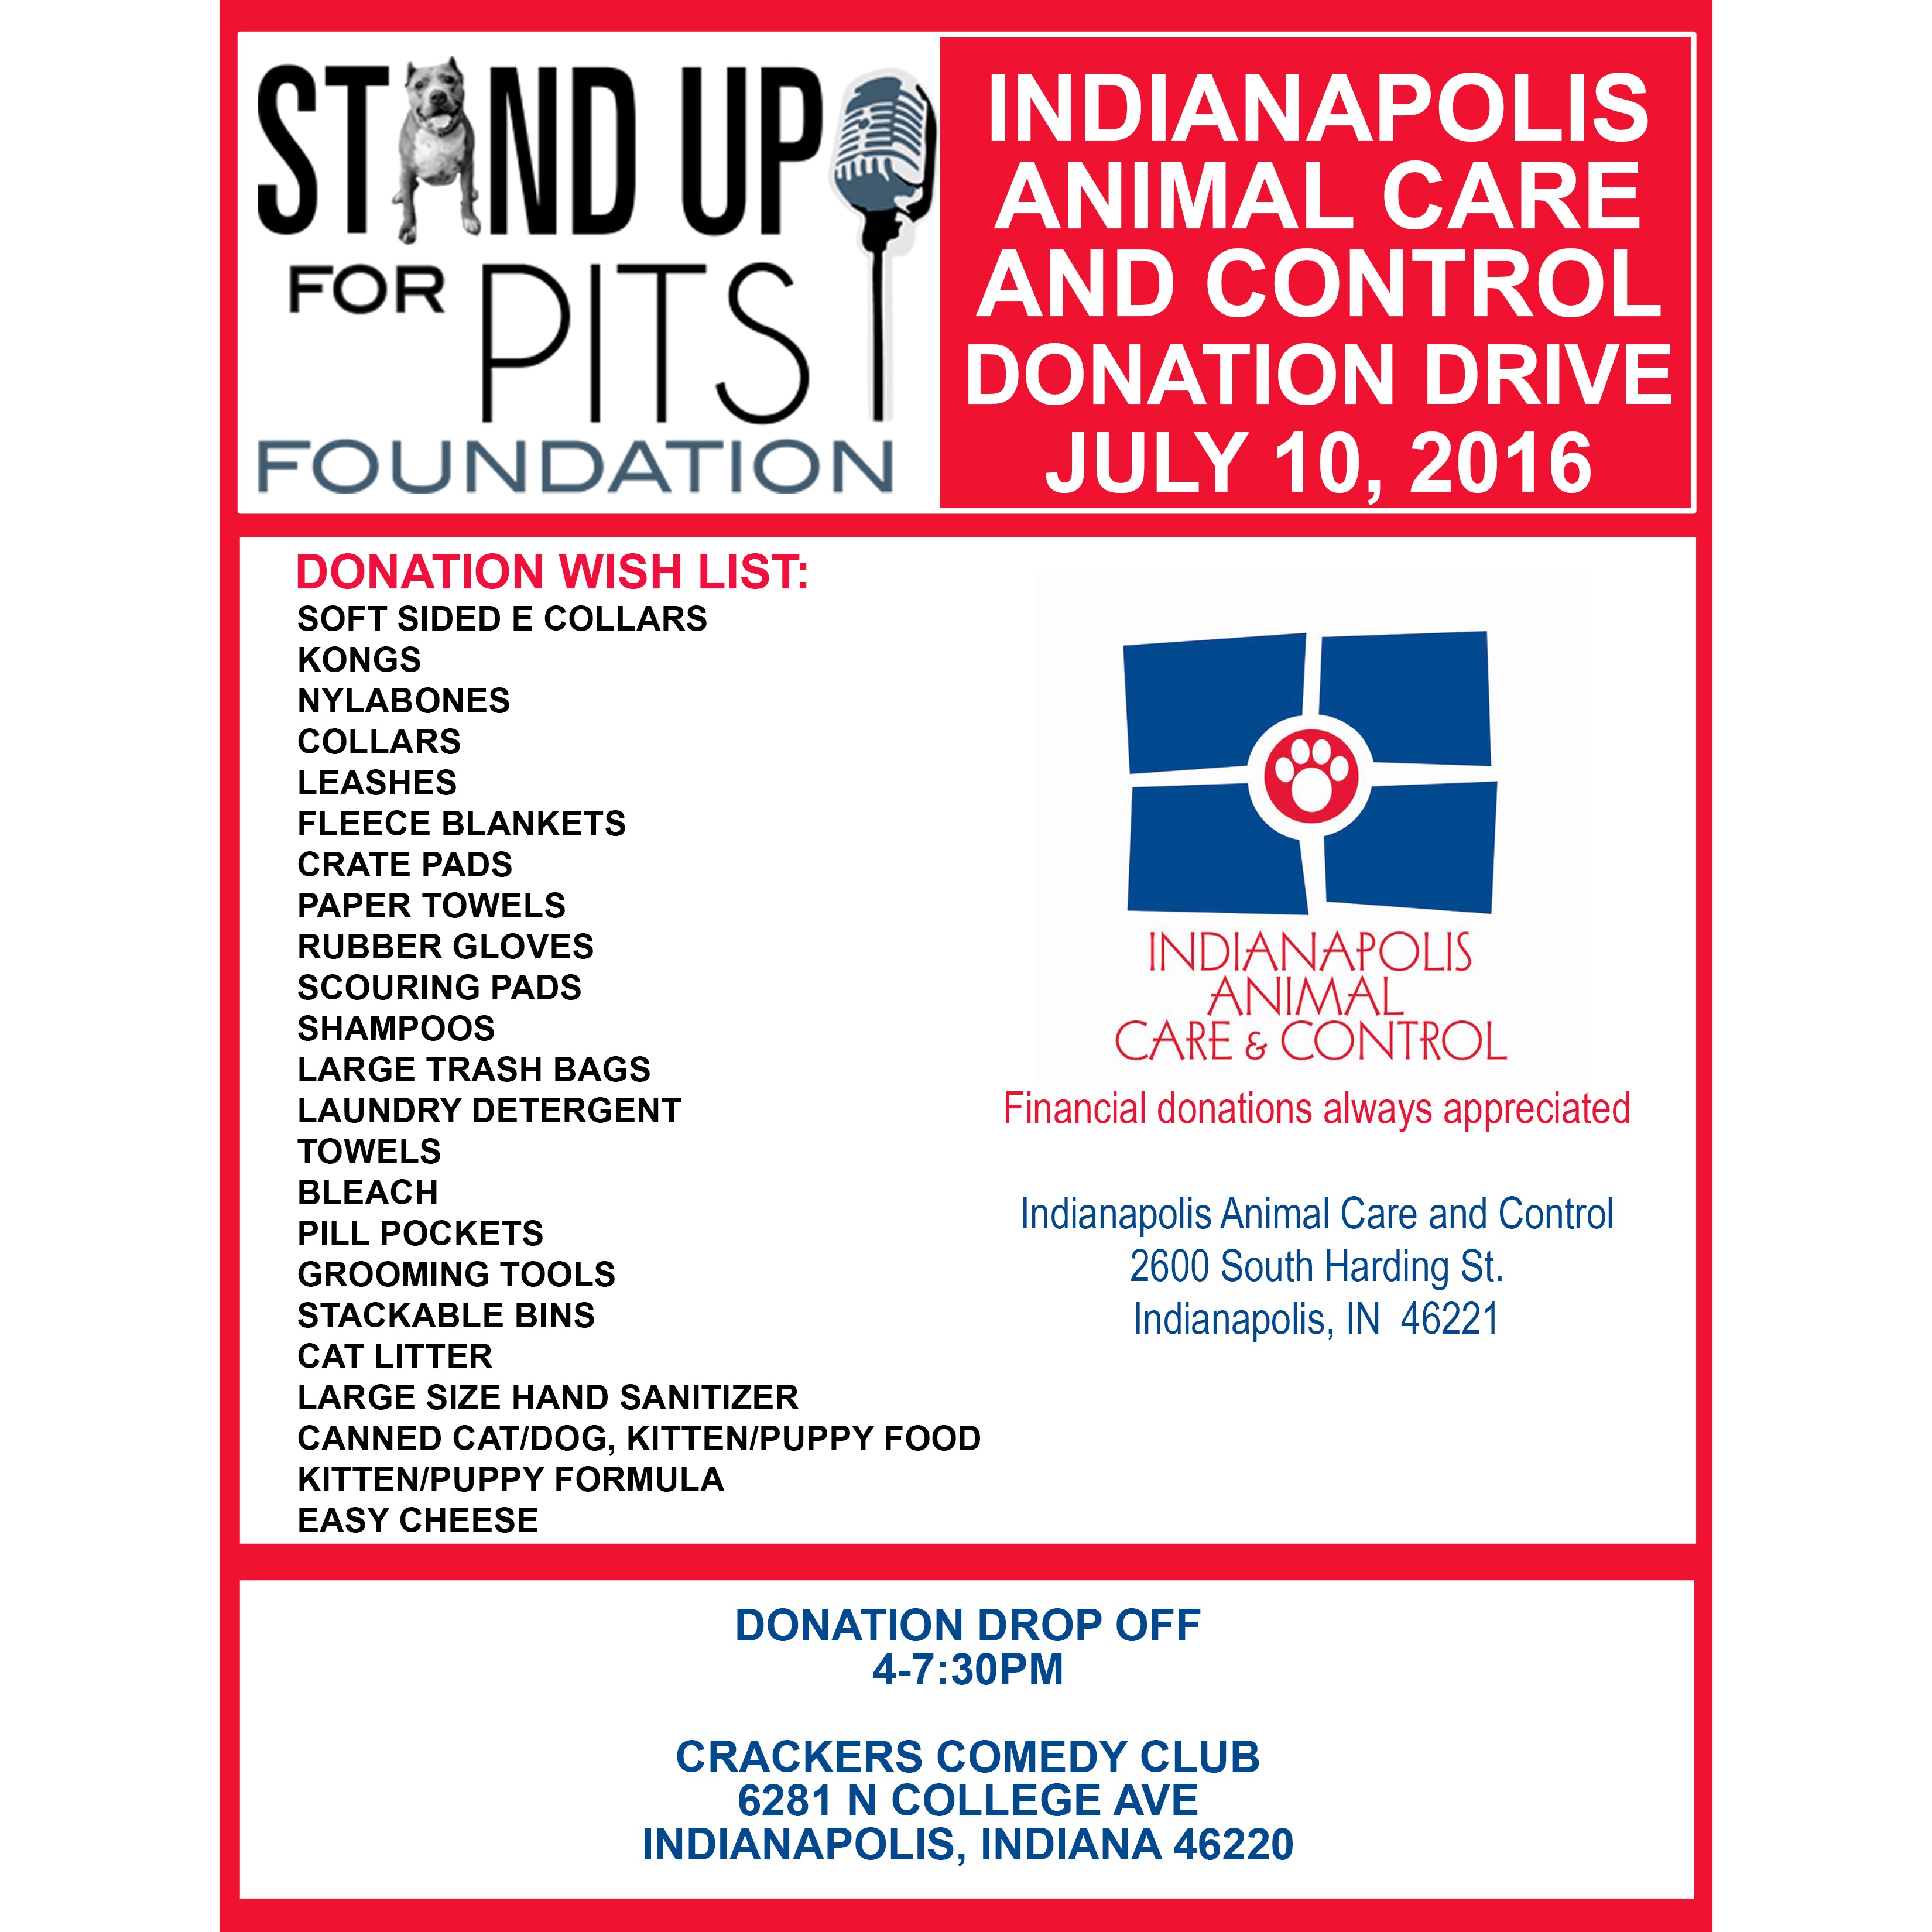 INDIANAPOLIS SUFP Donation Drive is JULY 10th!!!